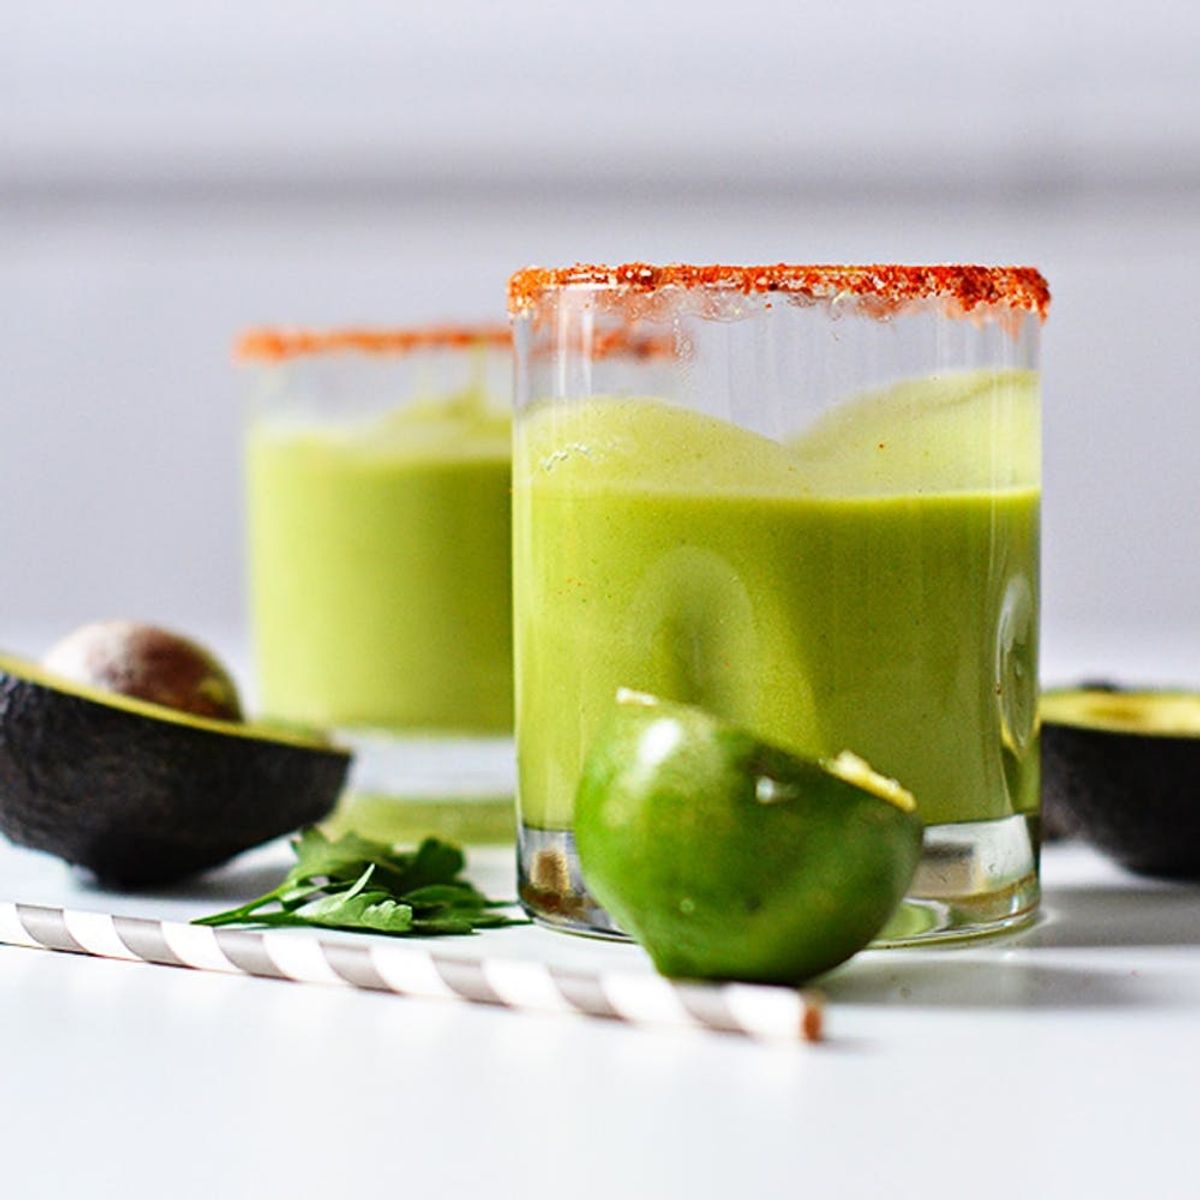 WTF This Margarita Is Made With Avocado